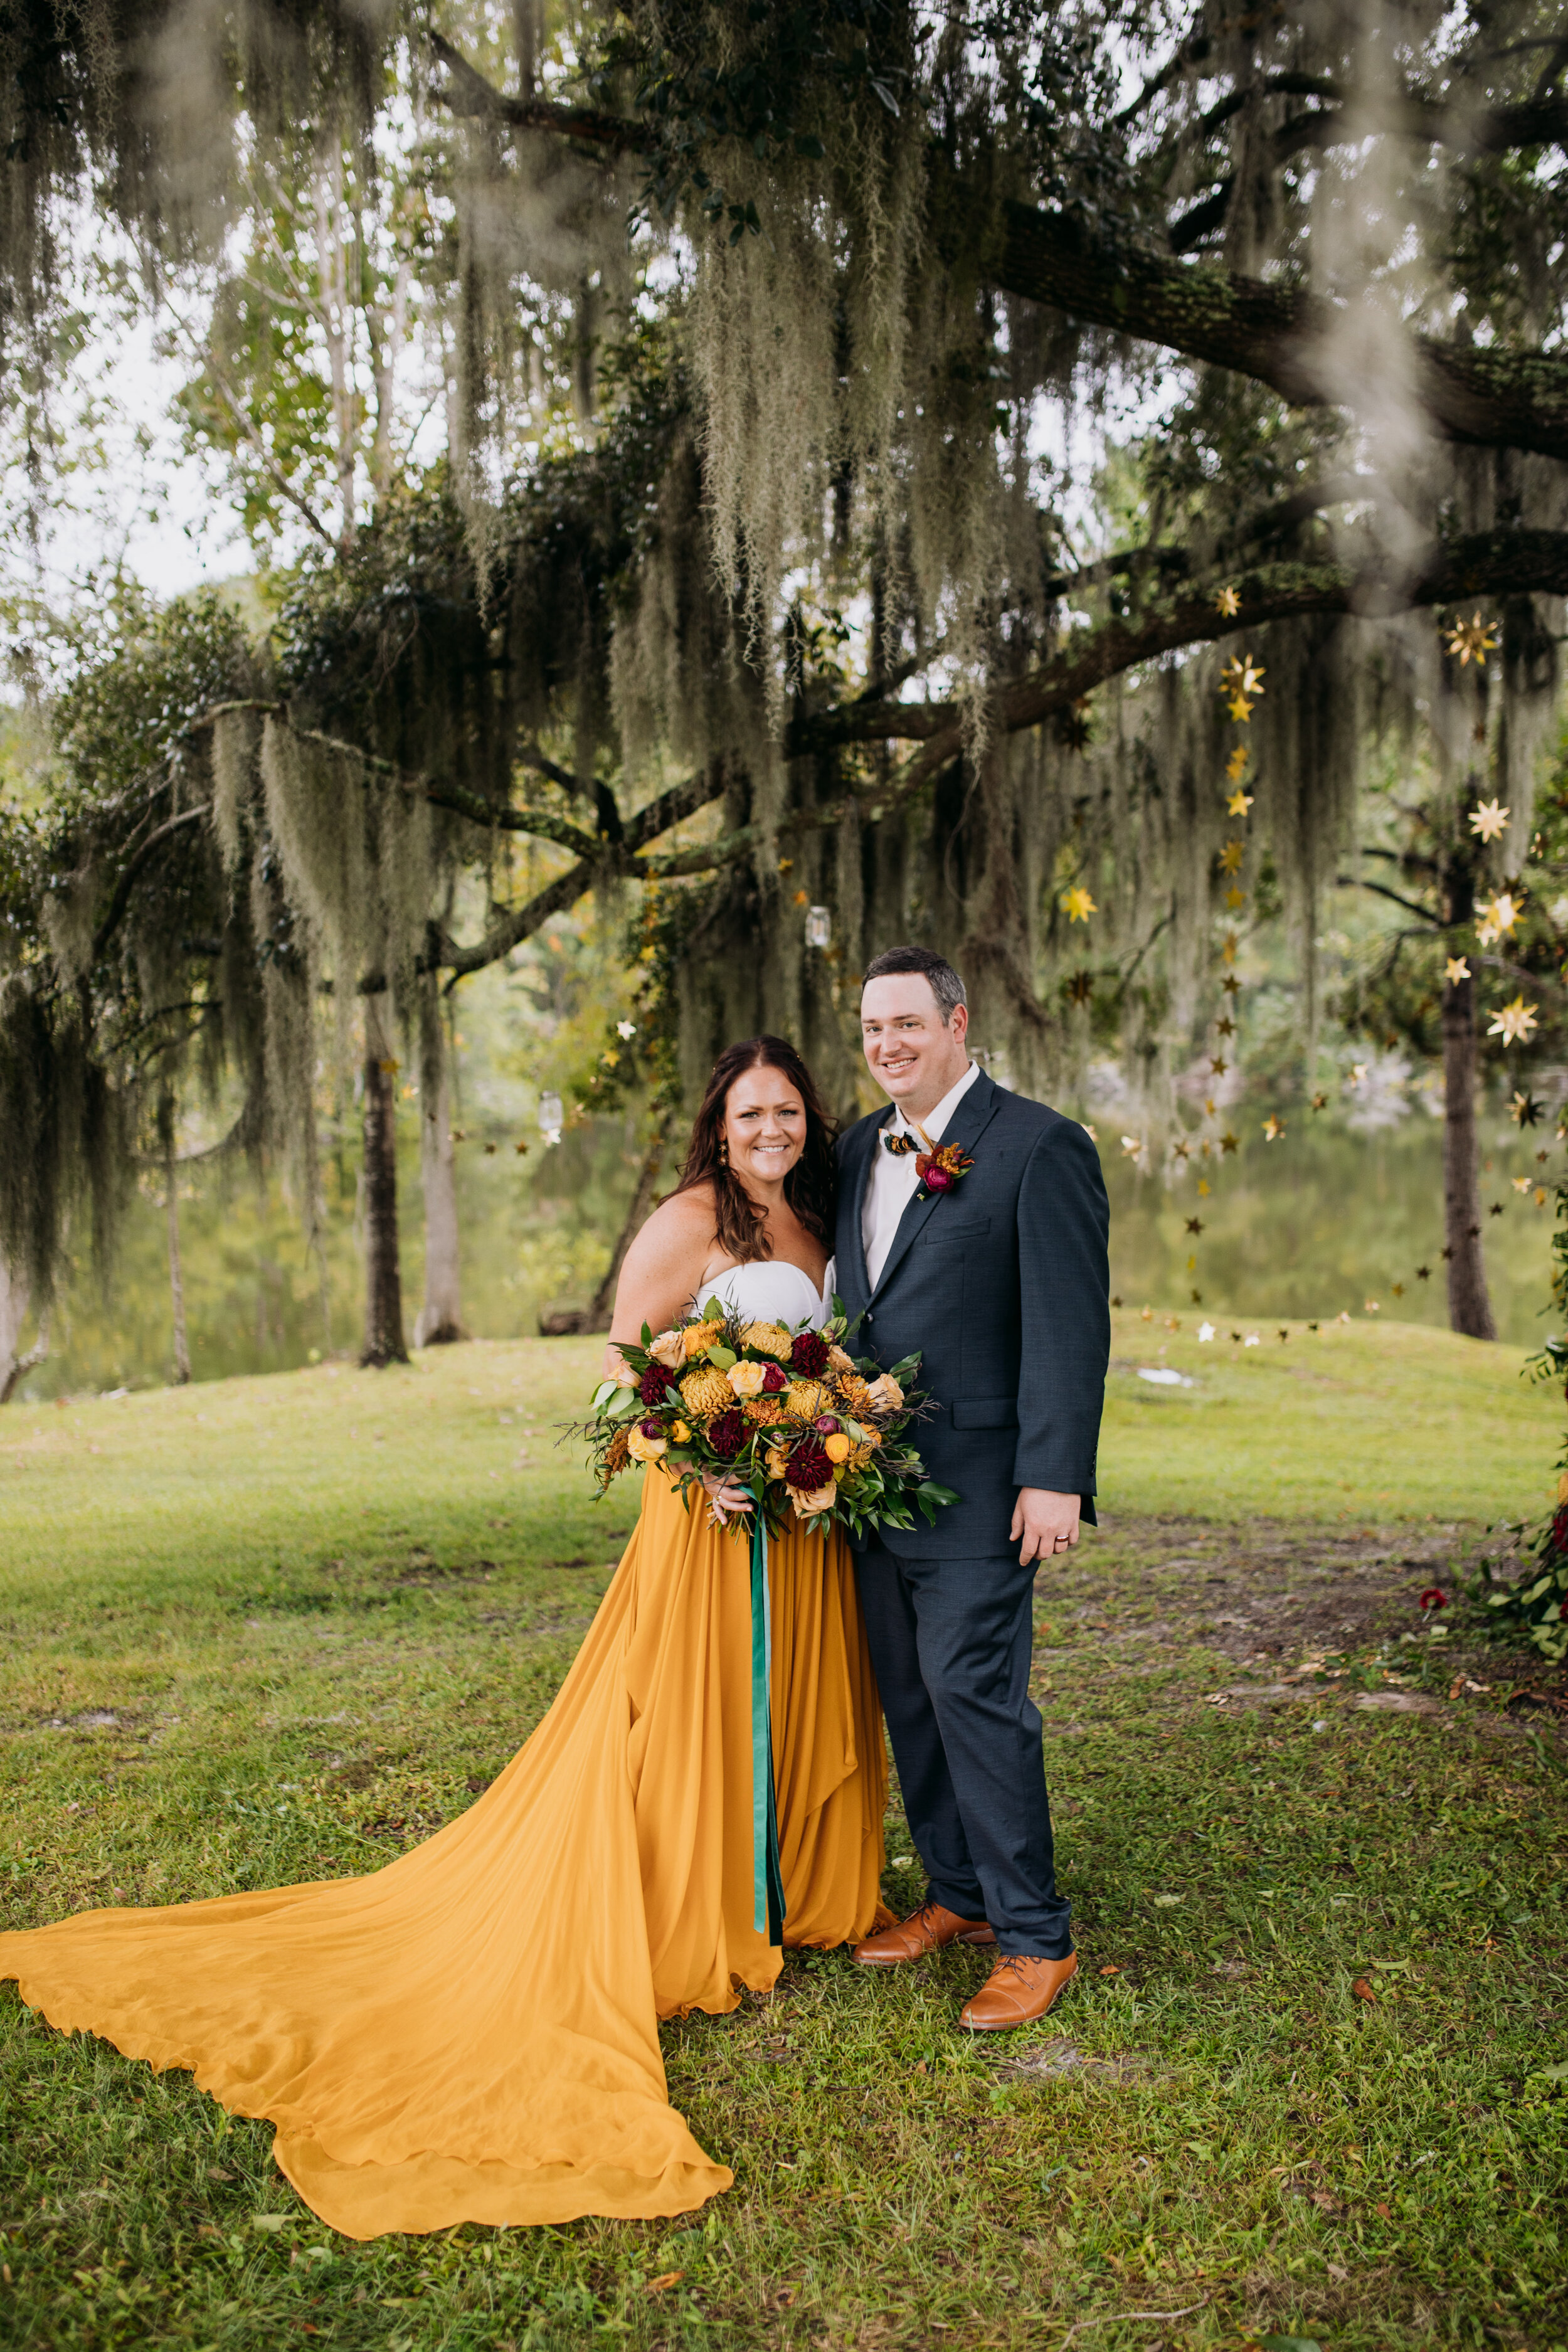 ivory-and-beau-florals-alex-and-david-red-gate-farms-wedding-flowers-wedding-florals-savannah-wedding-savannah-florist-wedding-florist-colorful-rich-bold-inspiration-flowers-Bowles368.jpg